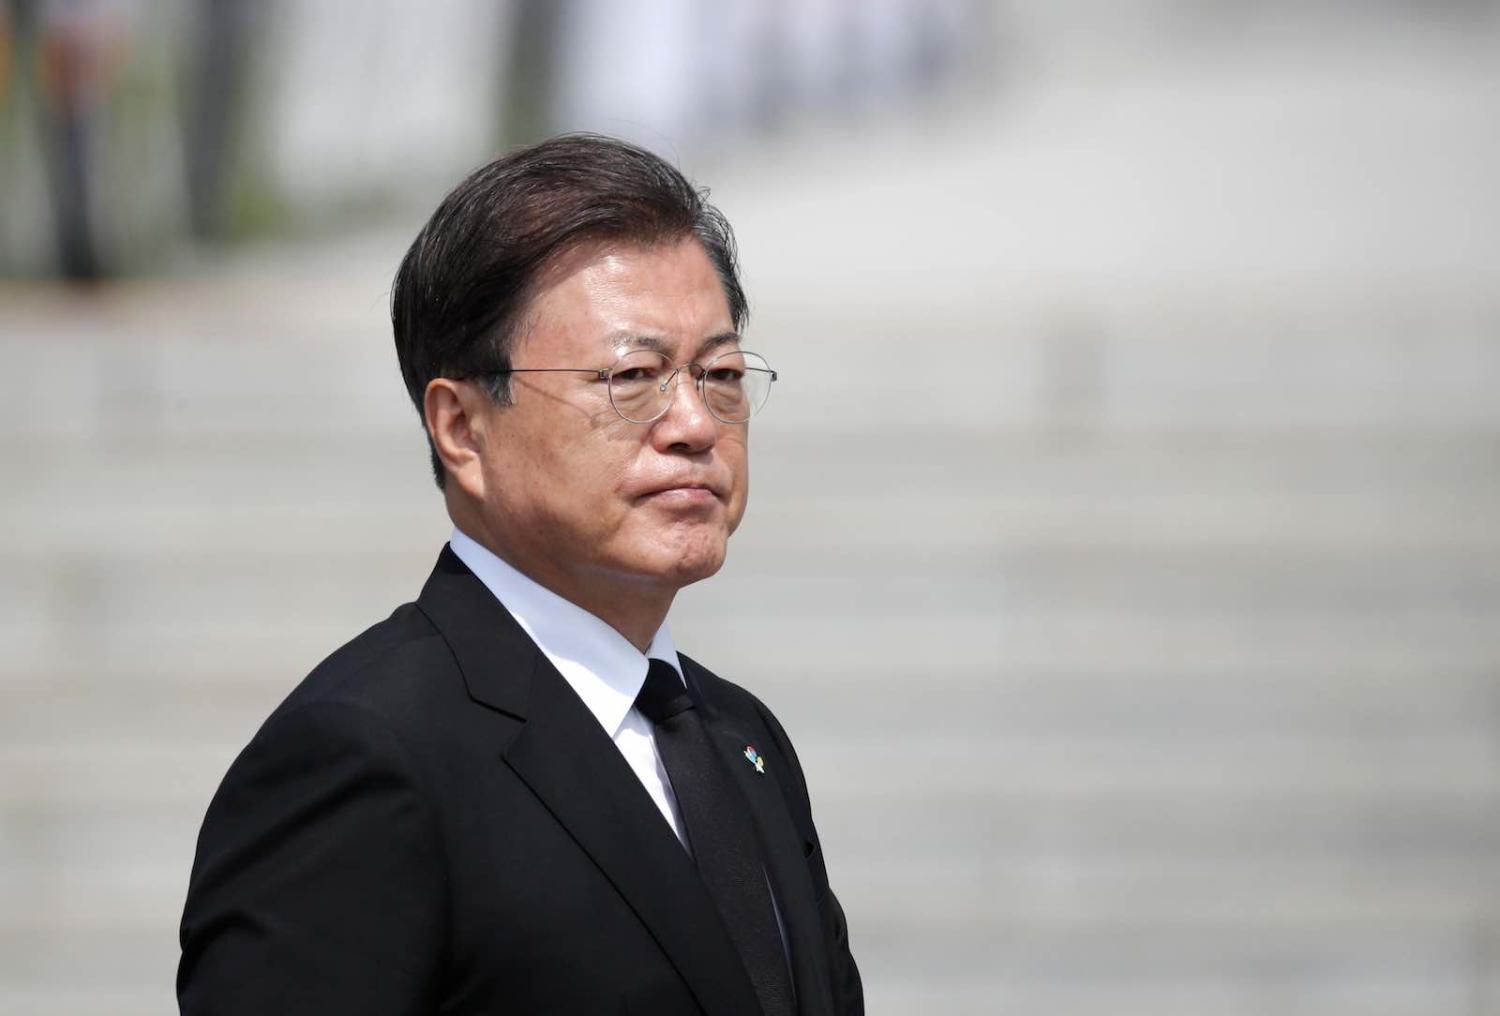 South Korean President Moon Jae-in attends a Memorial Day ceremony at the national cemetery in Daejeon on 6 June 2020 (Lee Jin-man/AFP/Getty Images)